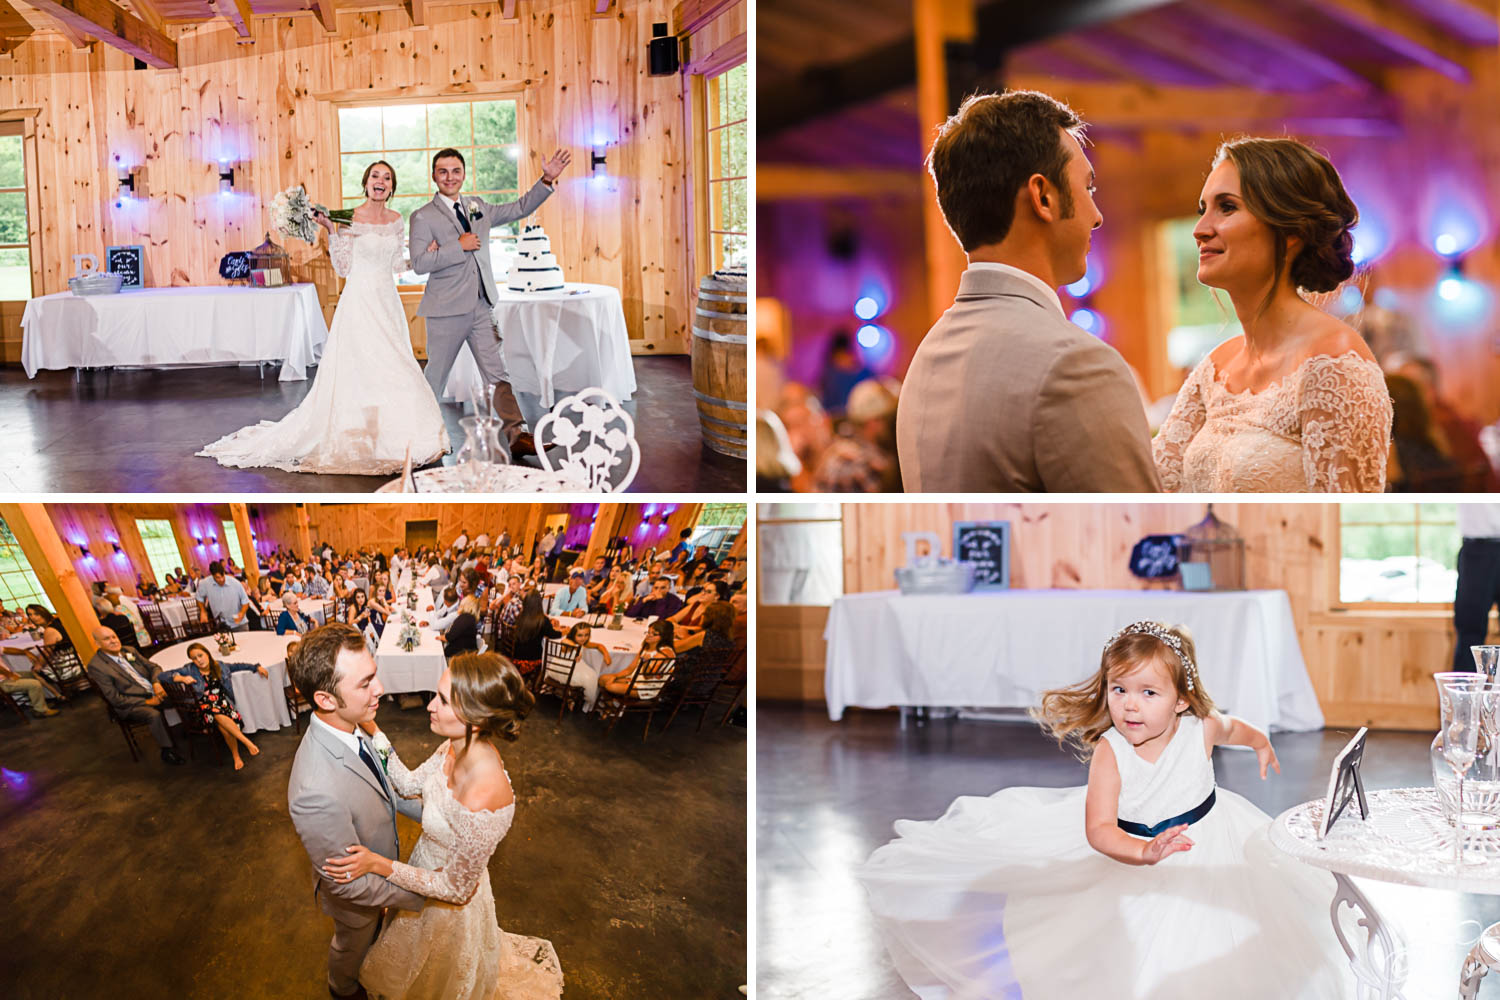 Brise and groom entering into indoor reception with purple up lighting at 4 Points Farm in Gatlinburg TN. And dancing their first Dance together as husband and wife. And little flower girl trirling around for all she's worth on the dance floor.